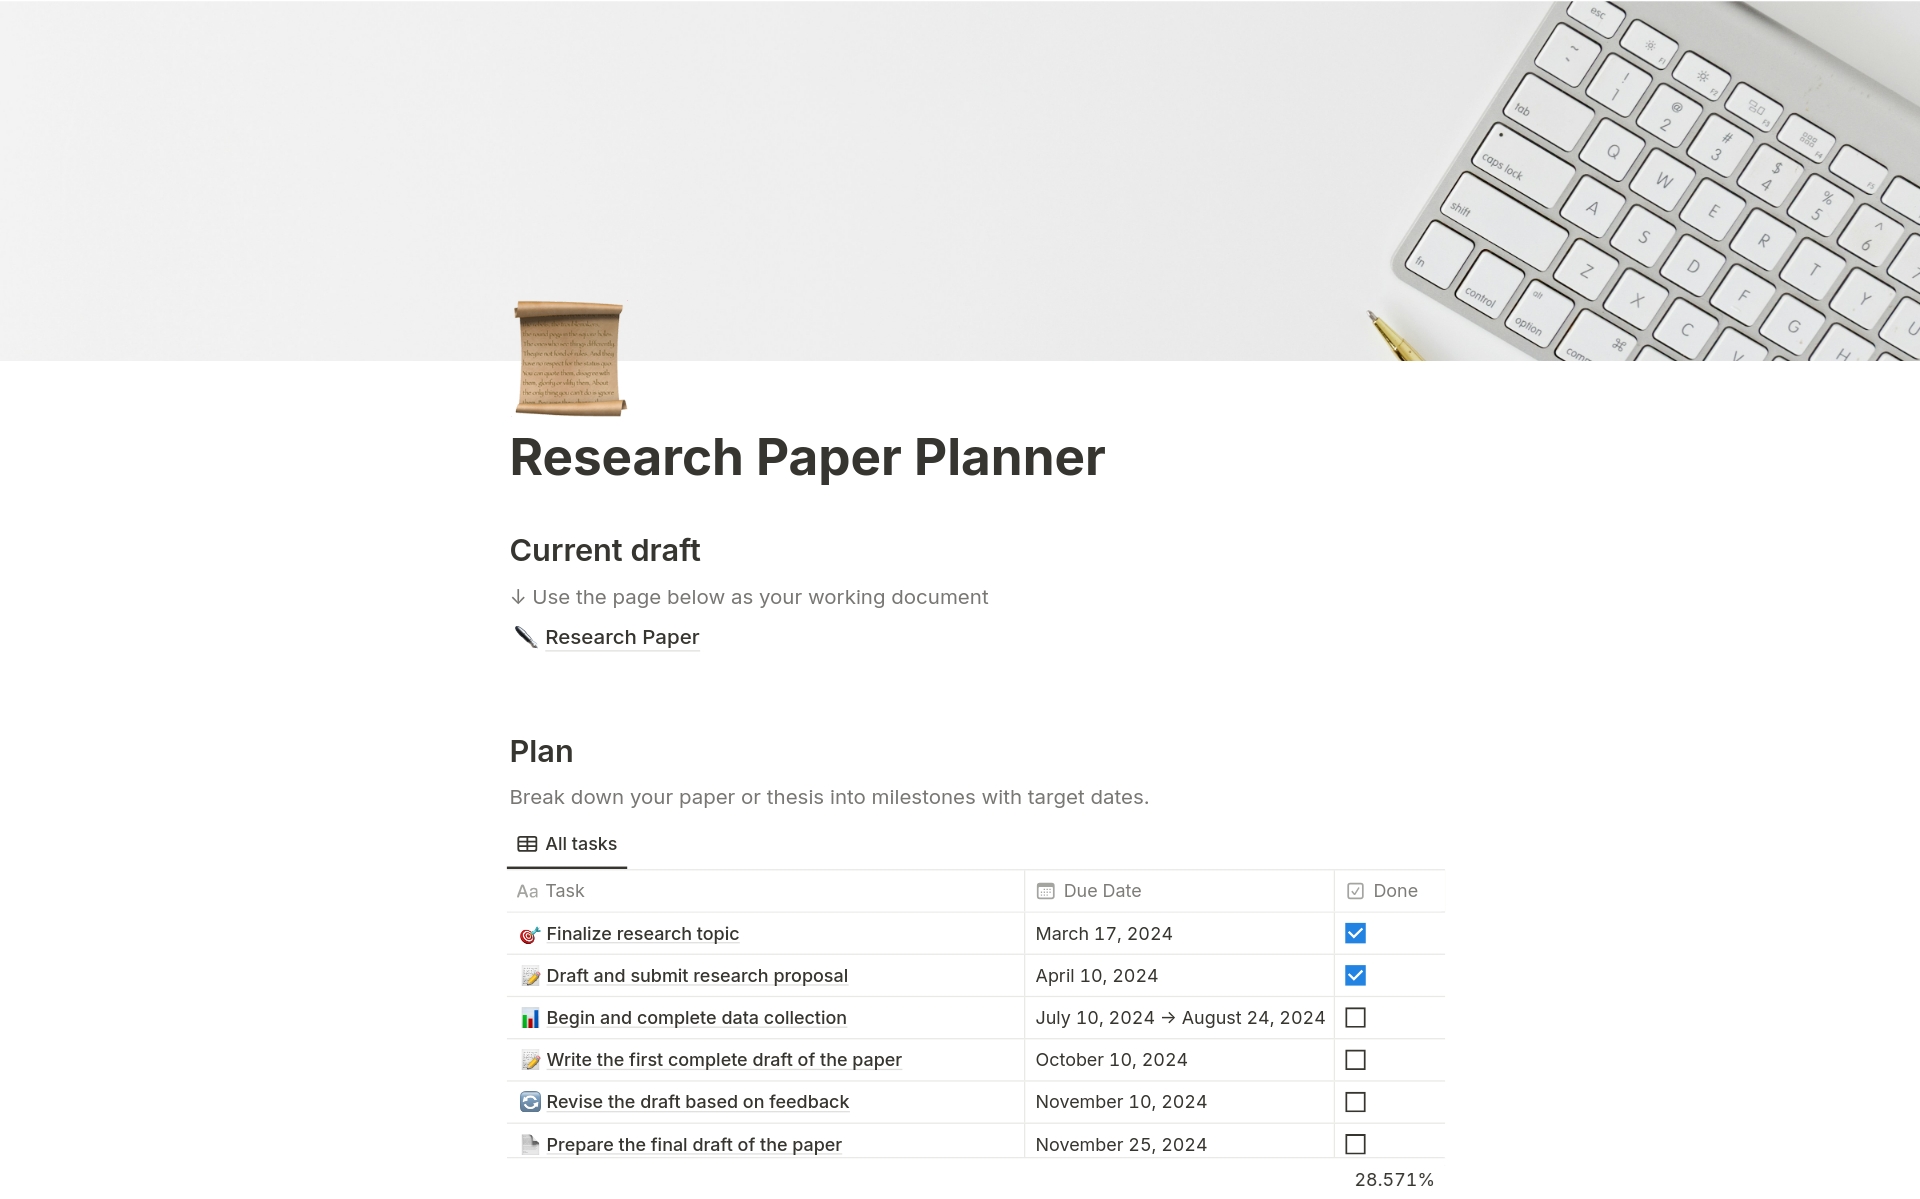 Make this your homepage for planning and writing a research paper or dissertation.